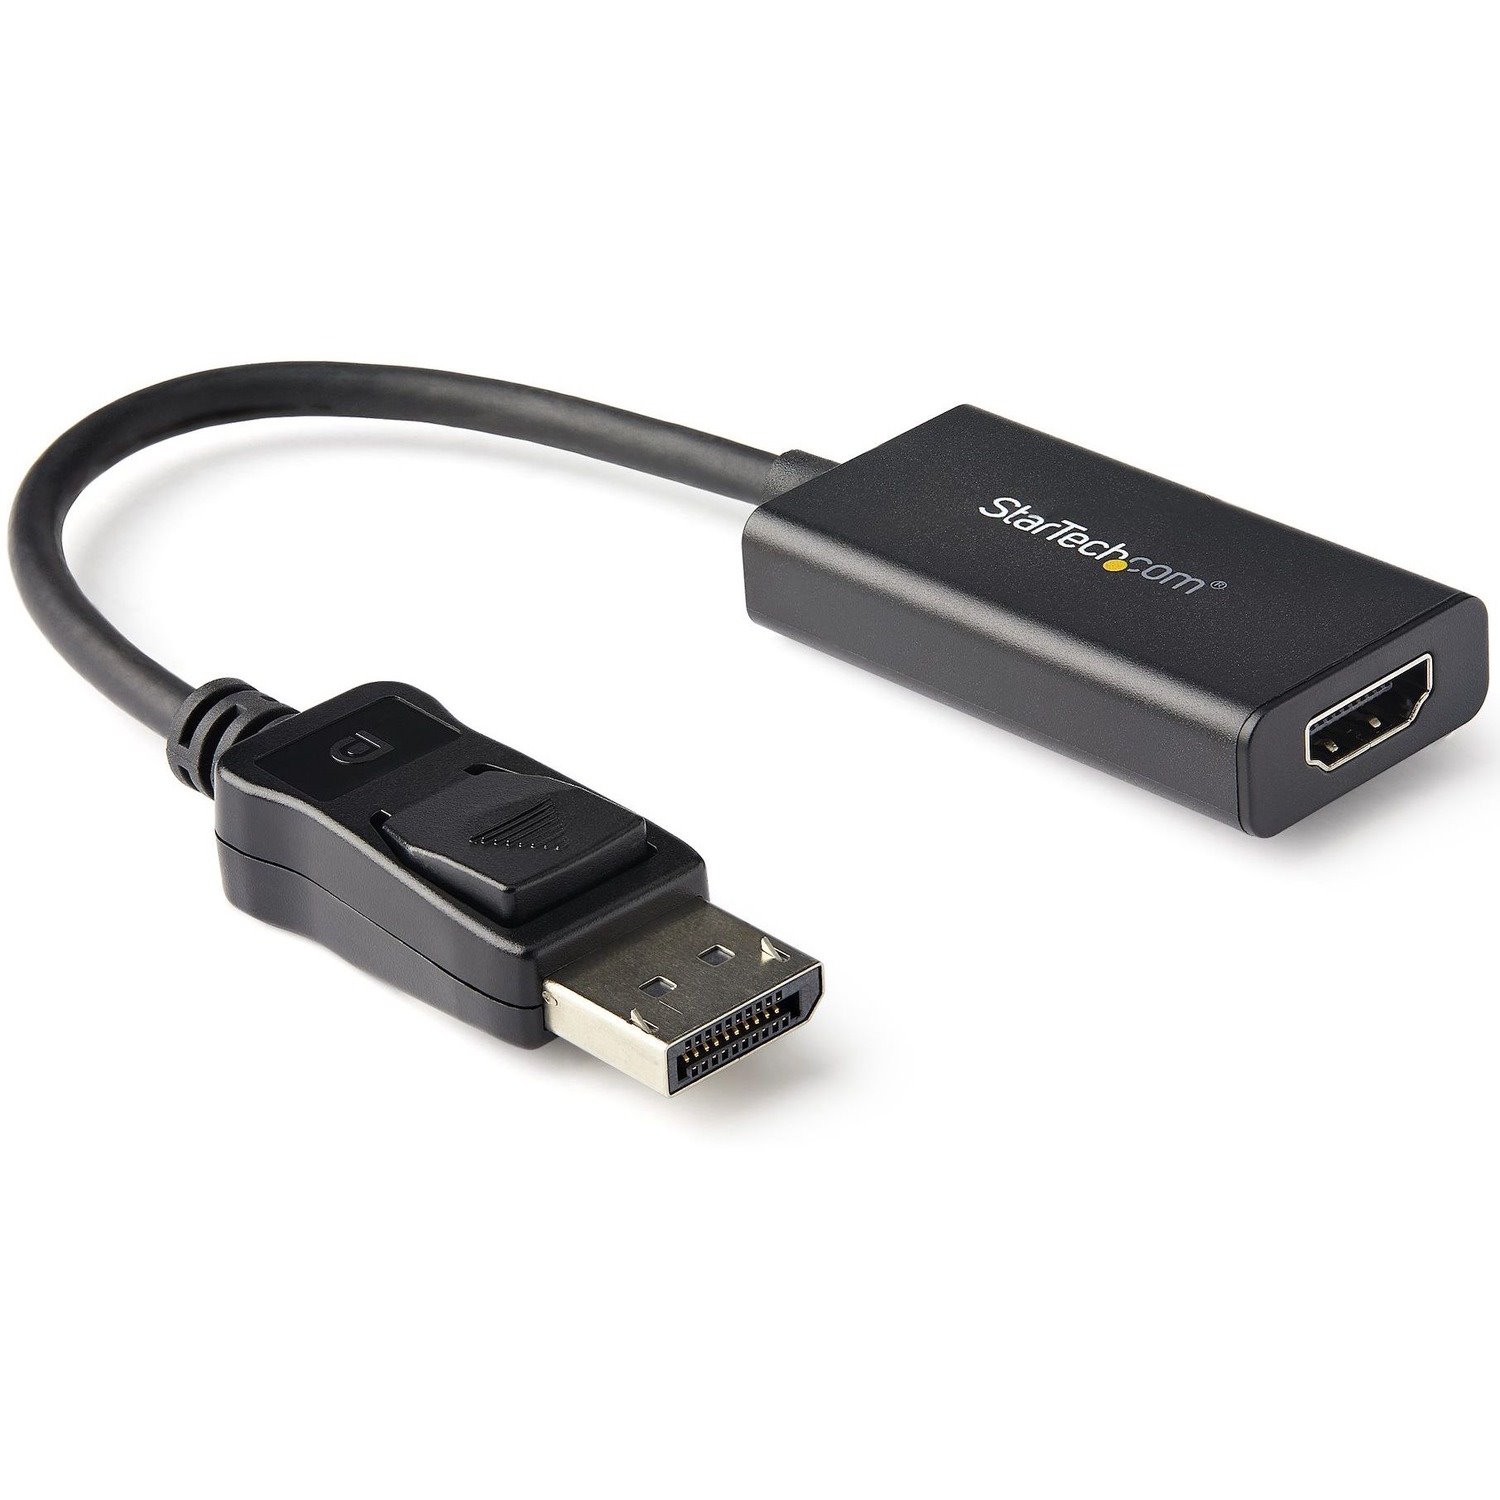 StarTech.com DisplayPort to HDMI Adapter, 4K 60Hz HDR10 Active DisplayPort 1.4 to HDMI 2.0b Converter, Latching DP Connector, DP to HDMI